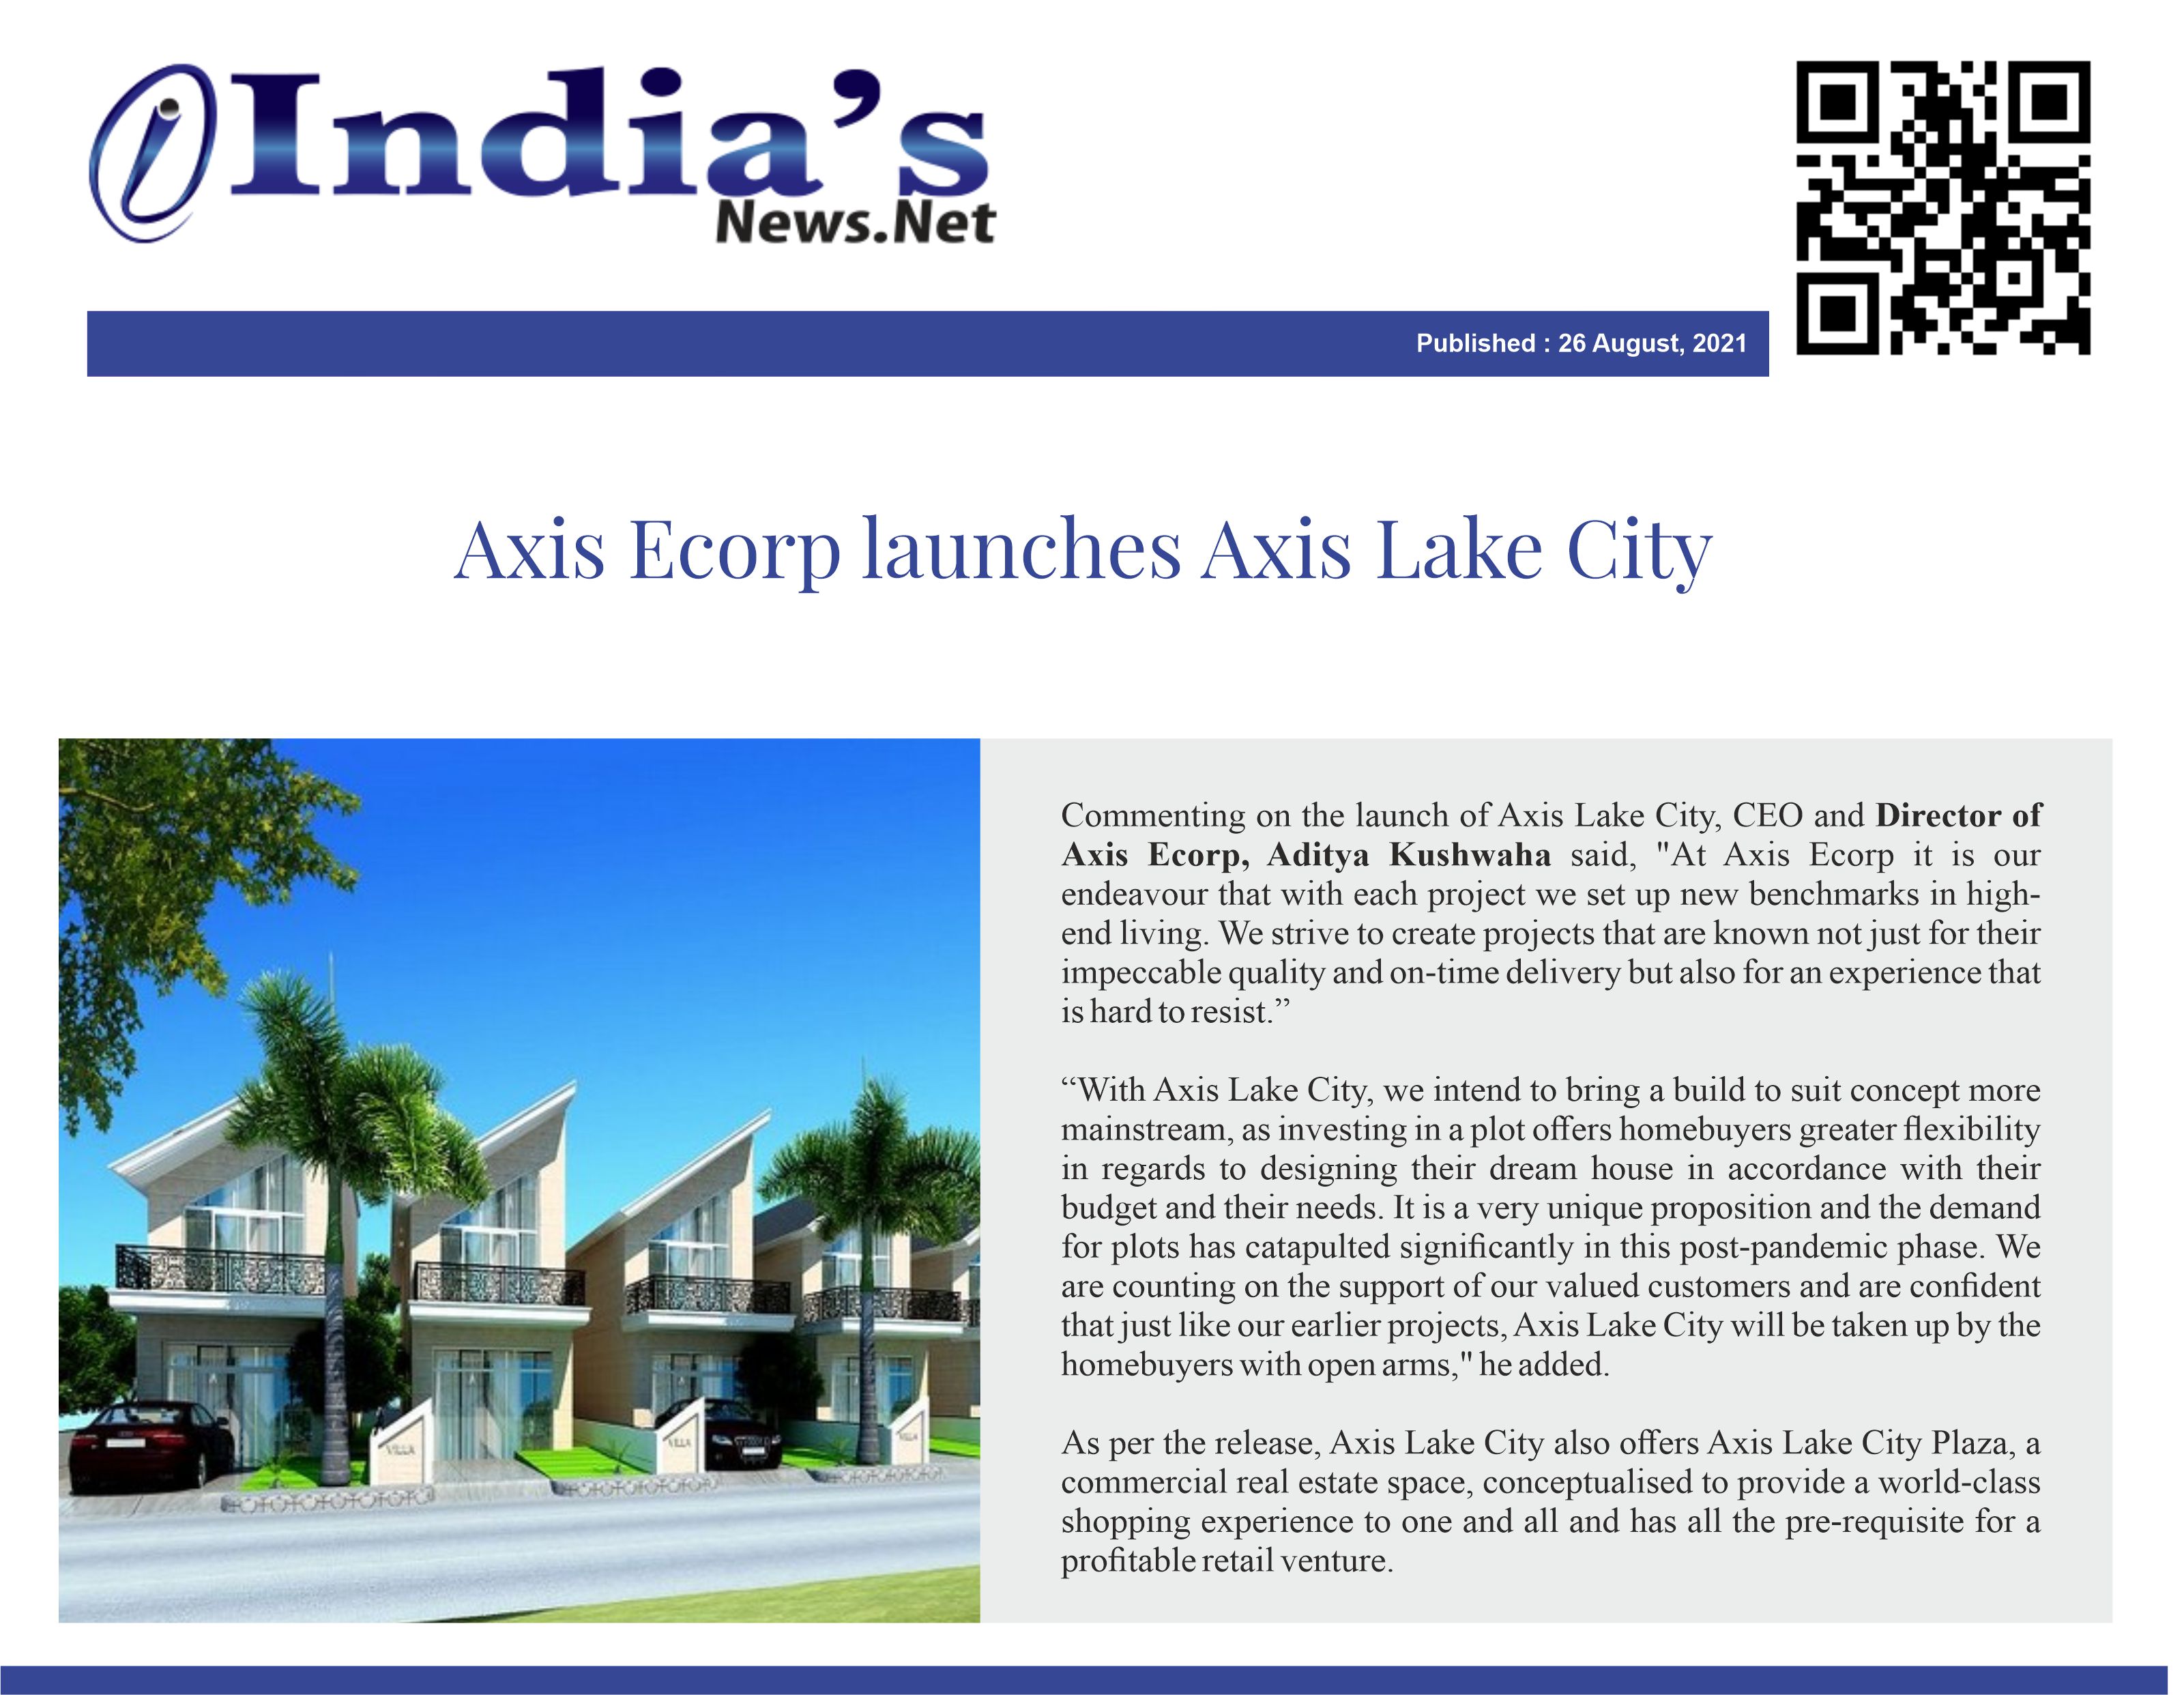 Axis Ecorp launches Axis Lake City